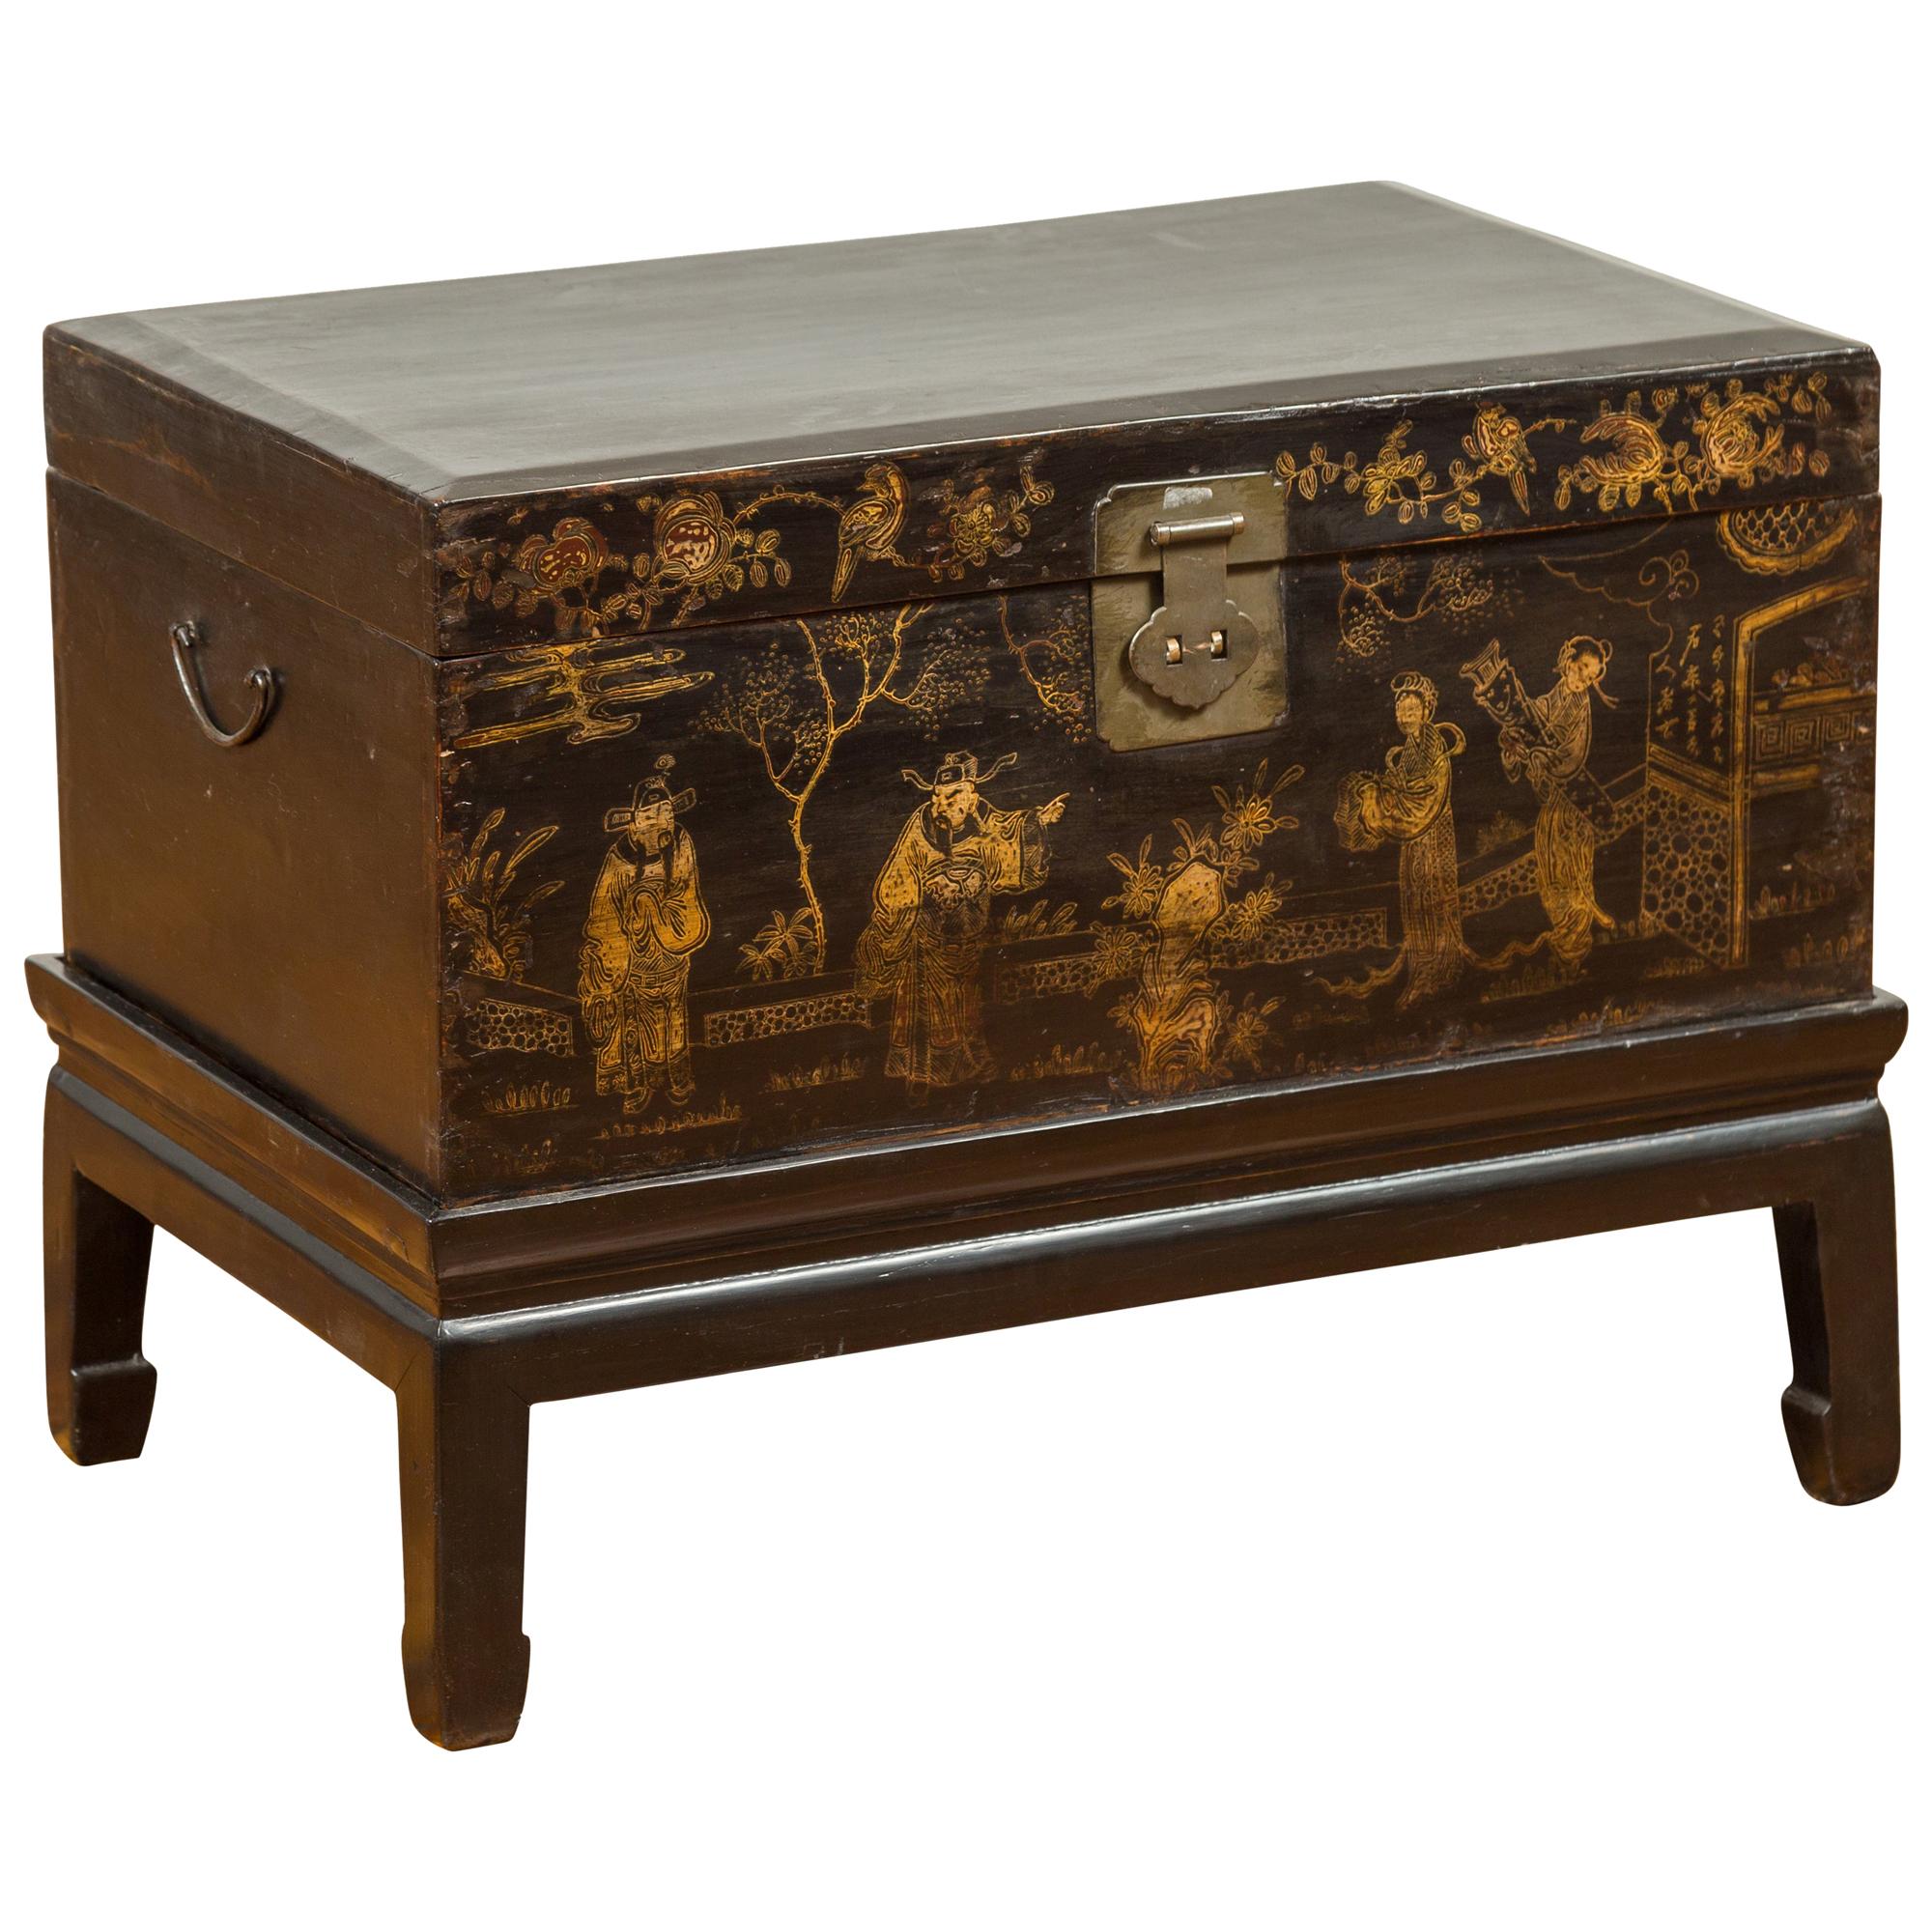 Qing Dynasty 19th Century Black and Gold Blanket Chest with Chinoiserie Painting